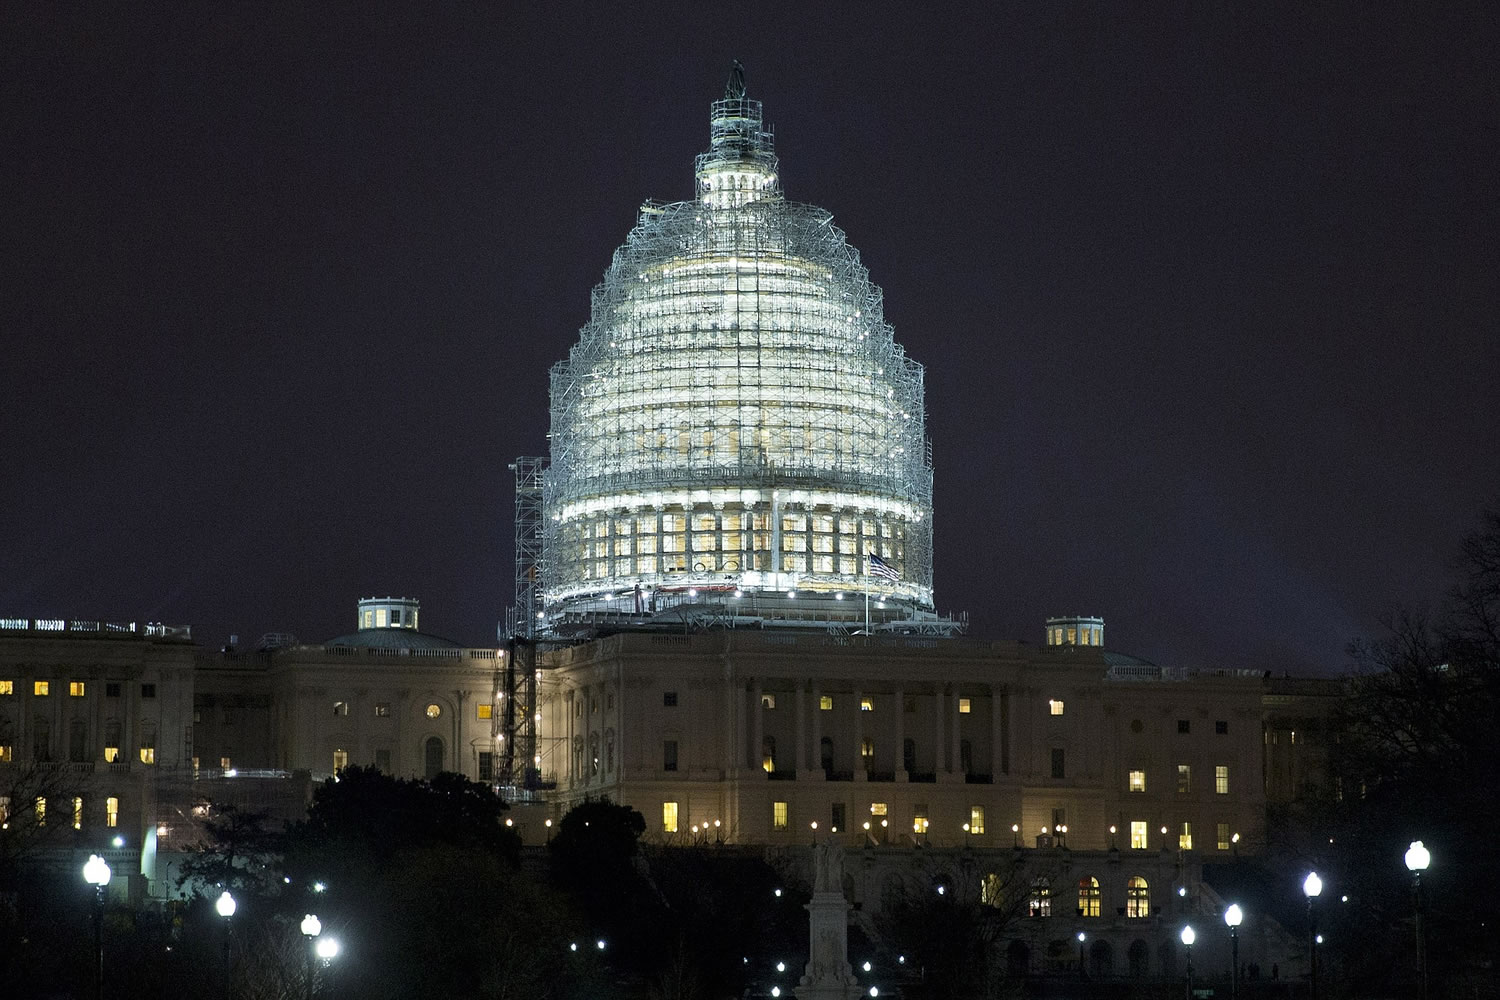 Lights illuminate the U.S. Capitol, which is covered in scaffolding for restoration, in Washington on Wednesday.